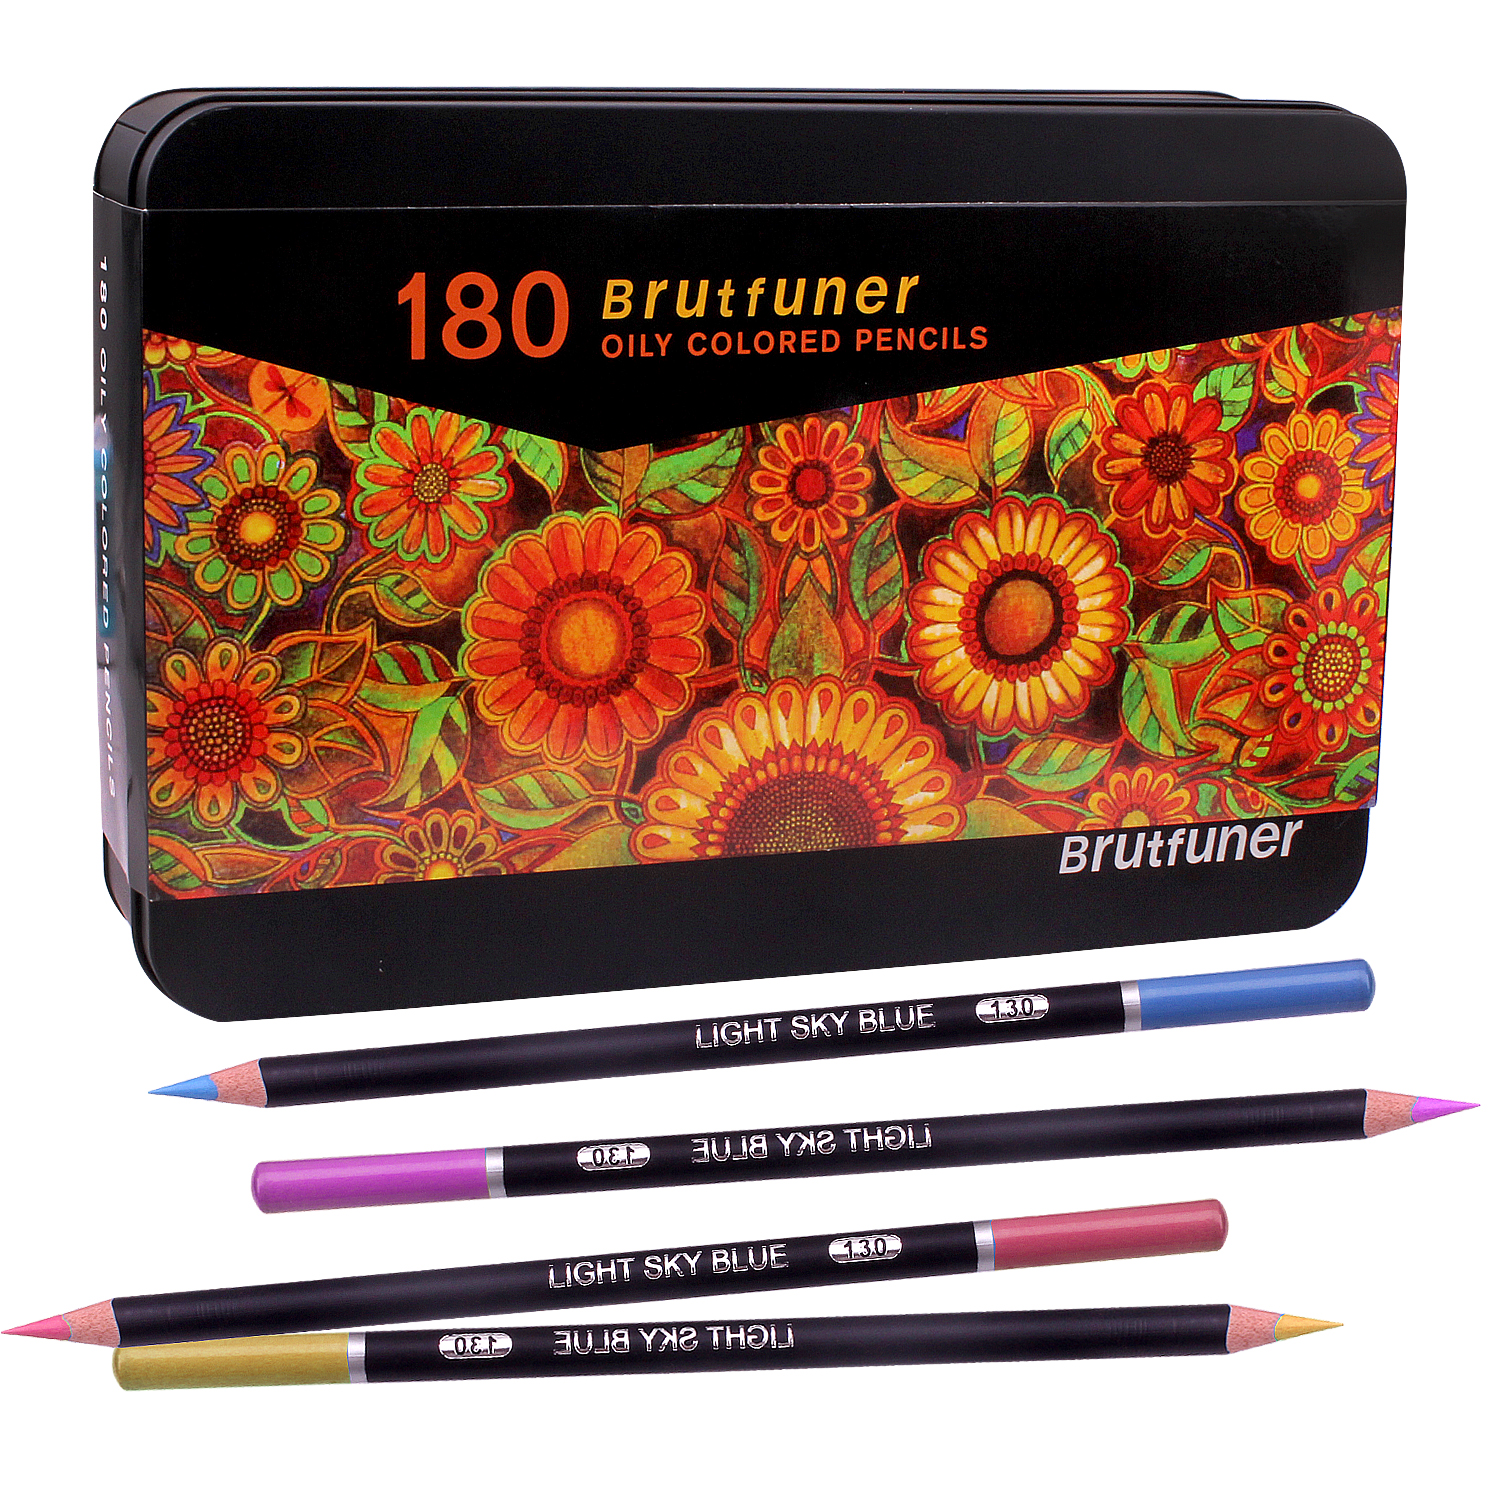 Colouring Pencils with Metal Box,180 Unique Coloured Pencils and Pre Sharpened Crayons for Coloring Book - Ideal Christmas Gift